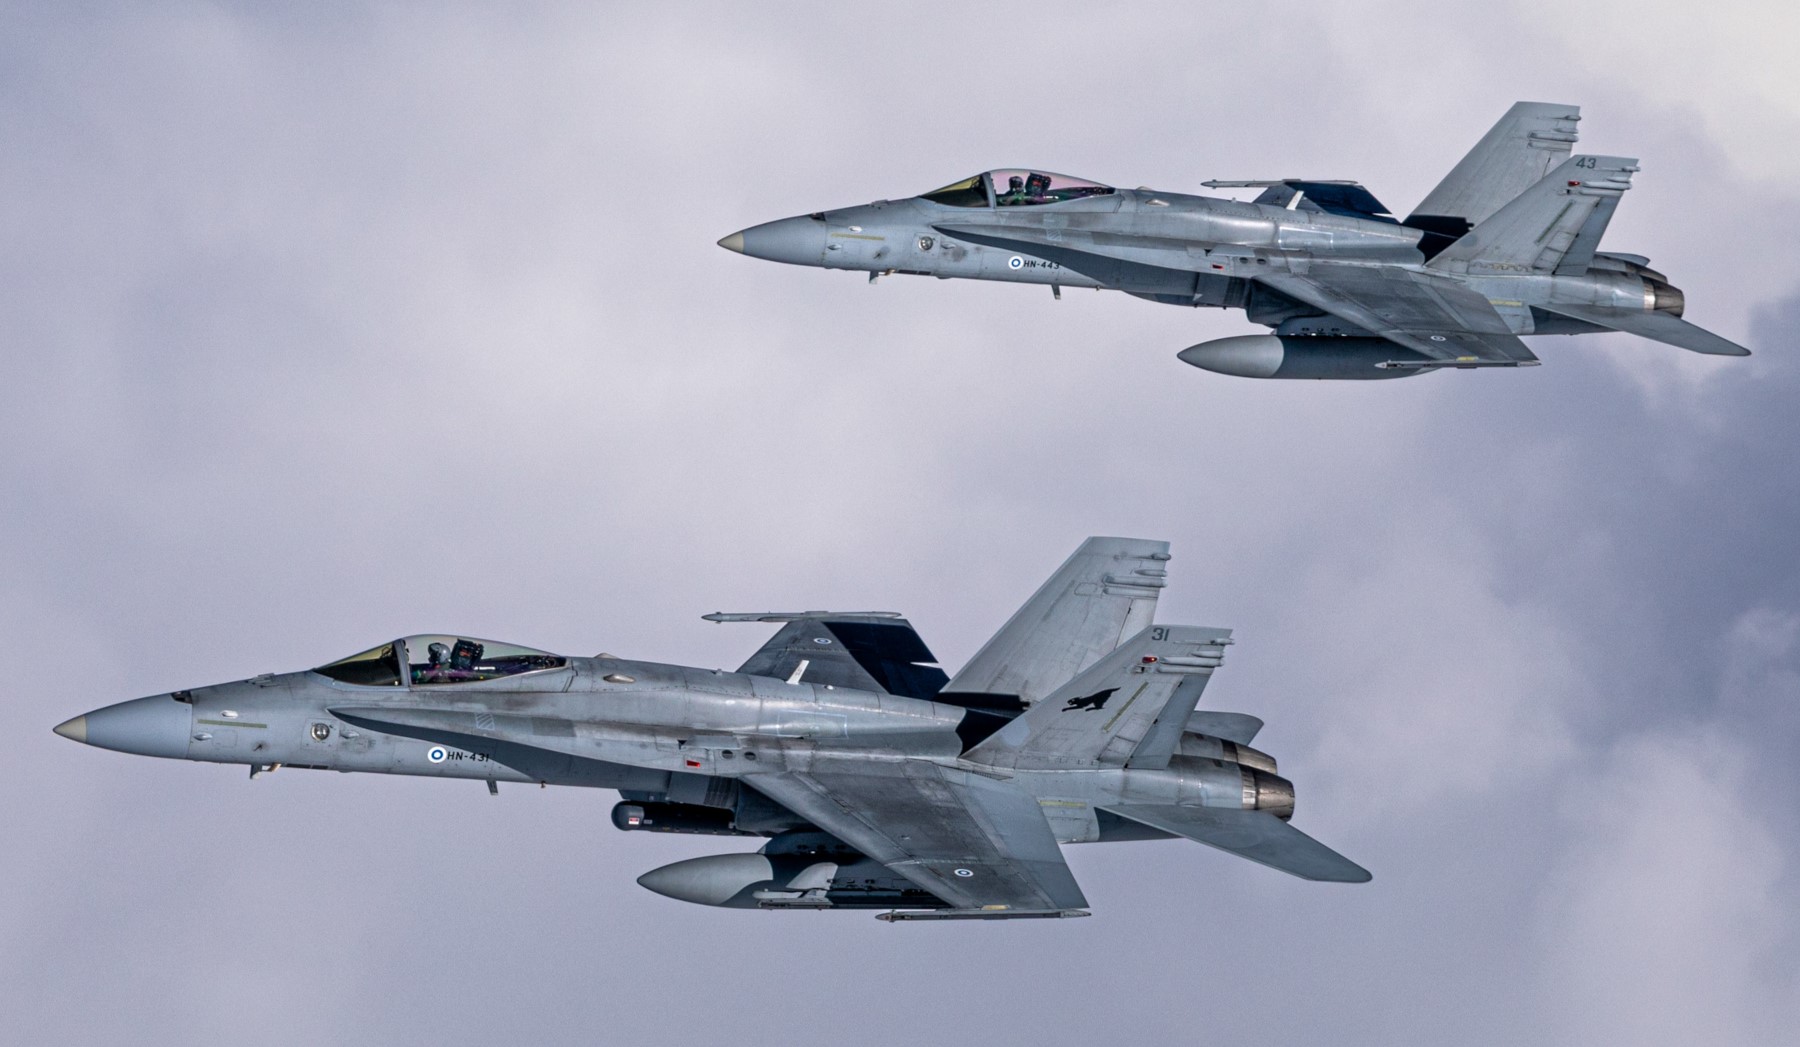 Finland Deploys F/A-18 Hornets to Romania for First Air Policing Mission Since Joining NATO